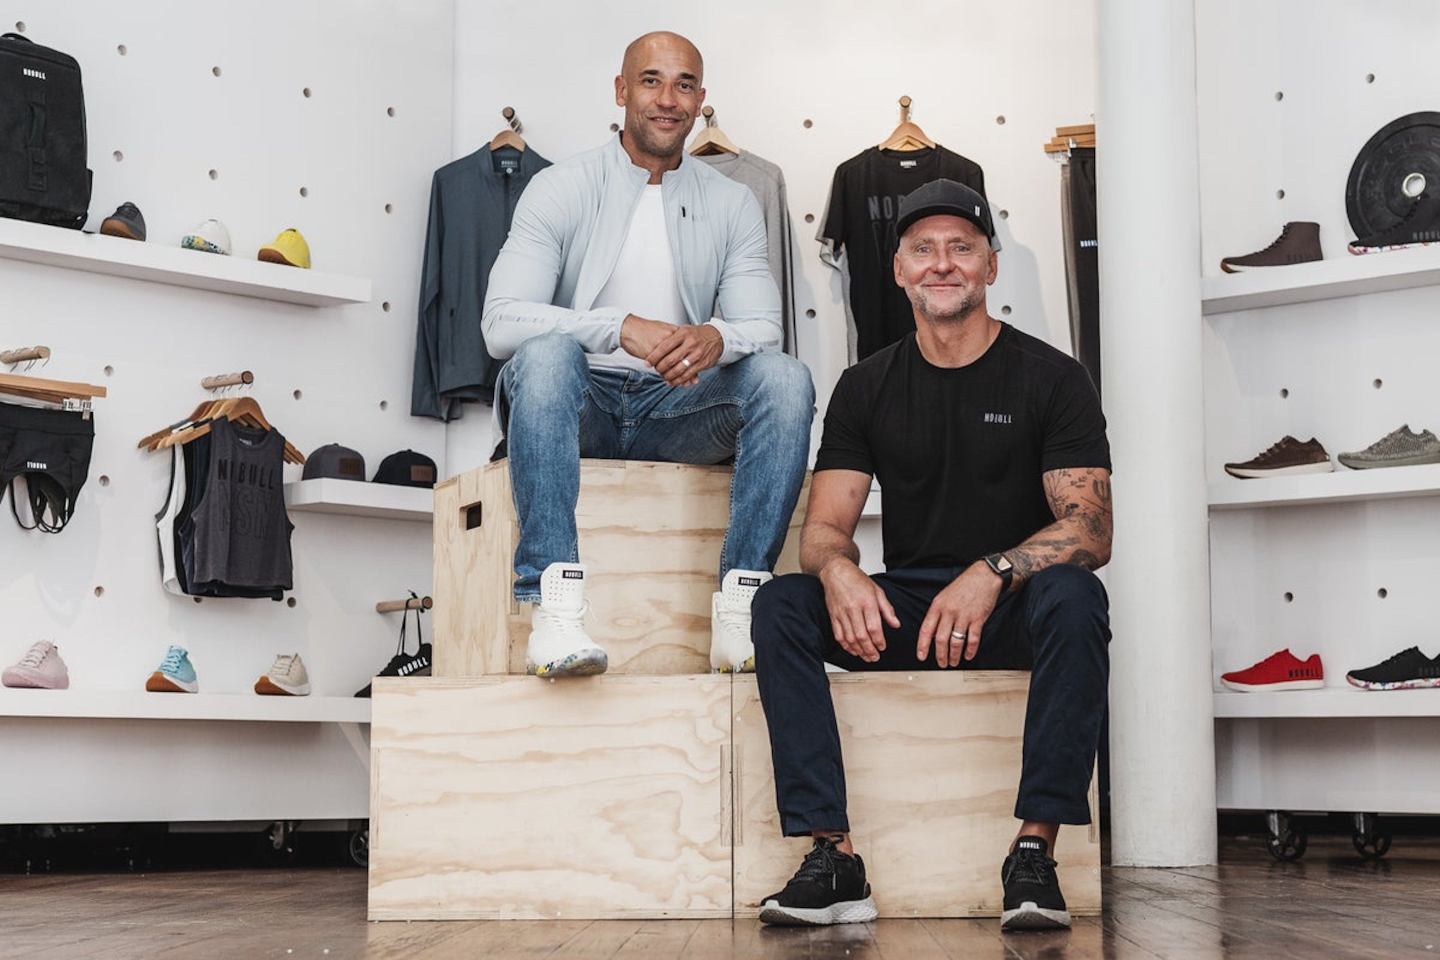 NOBULL co-founders Marcus Wilson (left) and Michael Schaeffer (right) in their store in Boston.